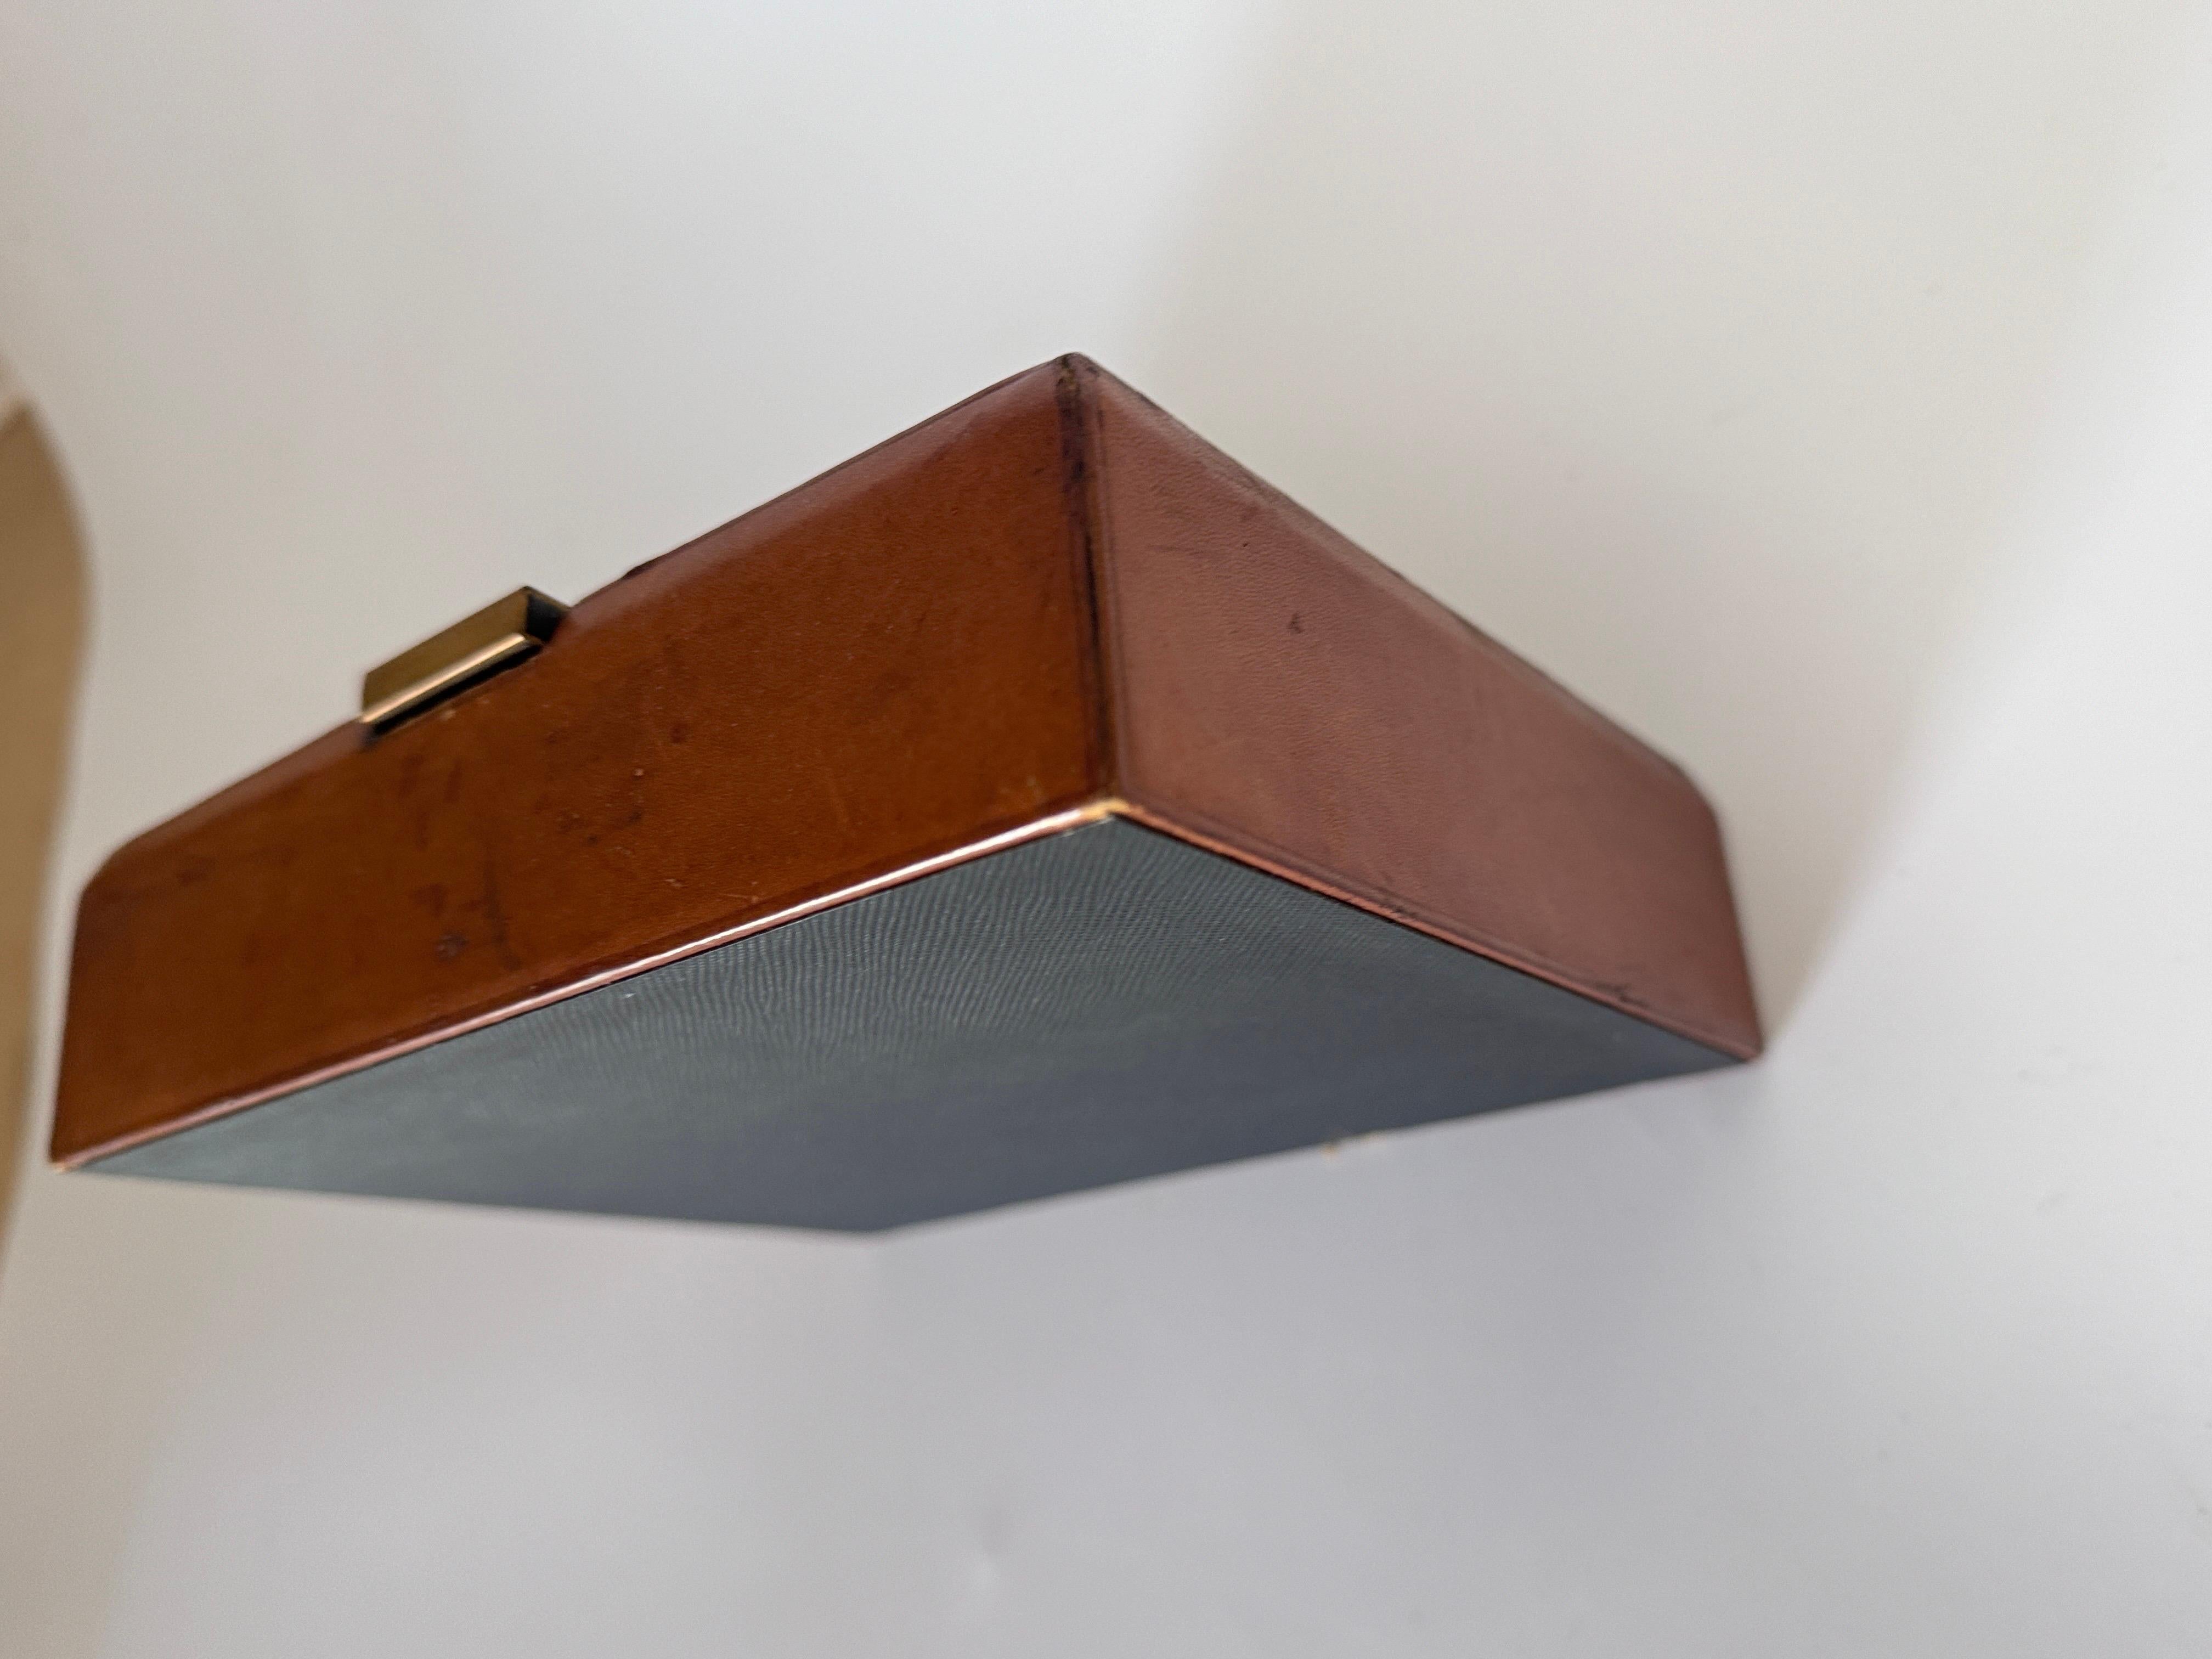 Mid-20th Century Leather Covered Tobacco Box Wood Brown Jacques Adnet Style France 1940 by Lancel For Sale